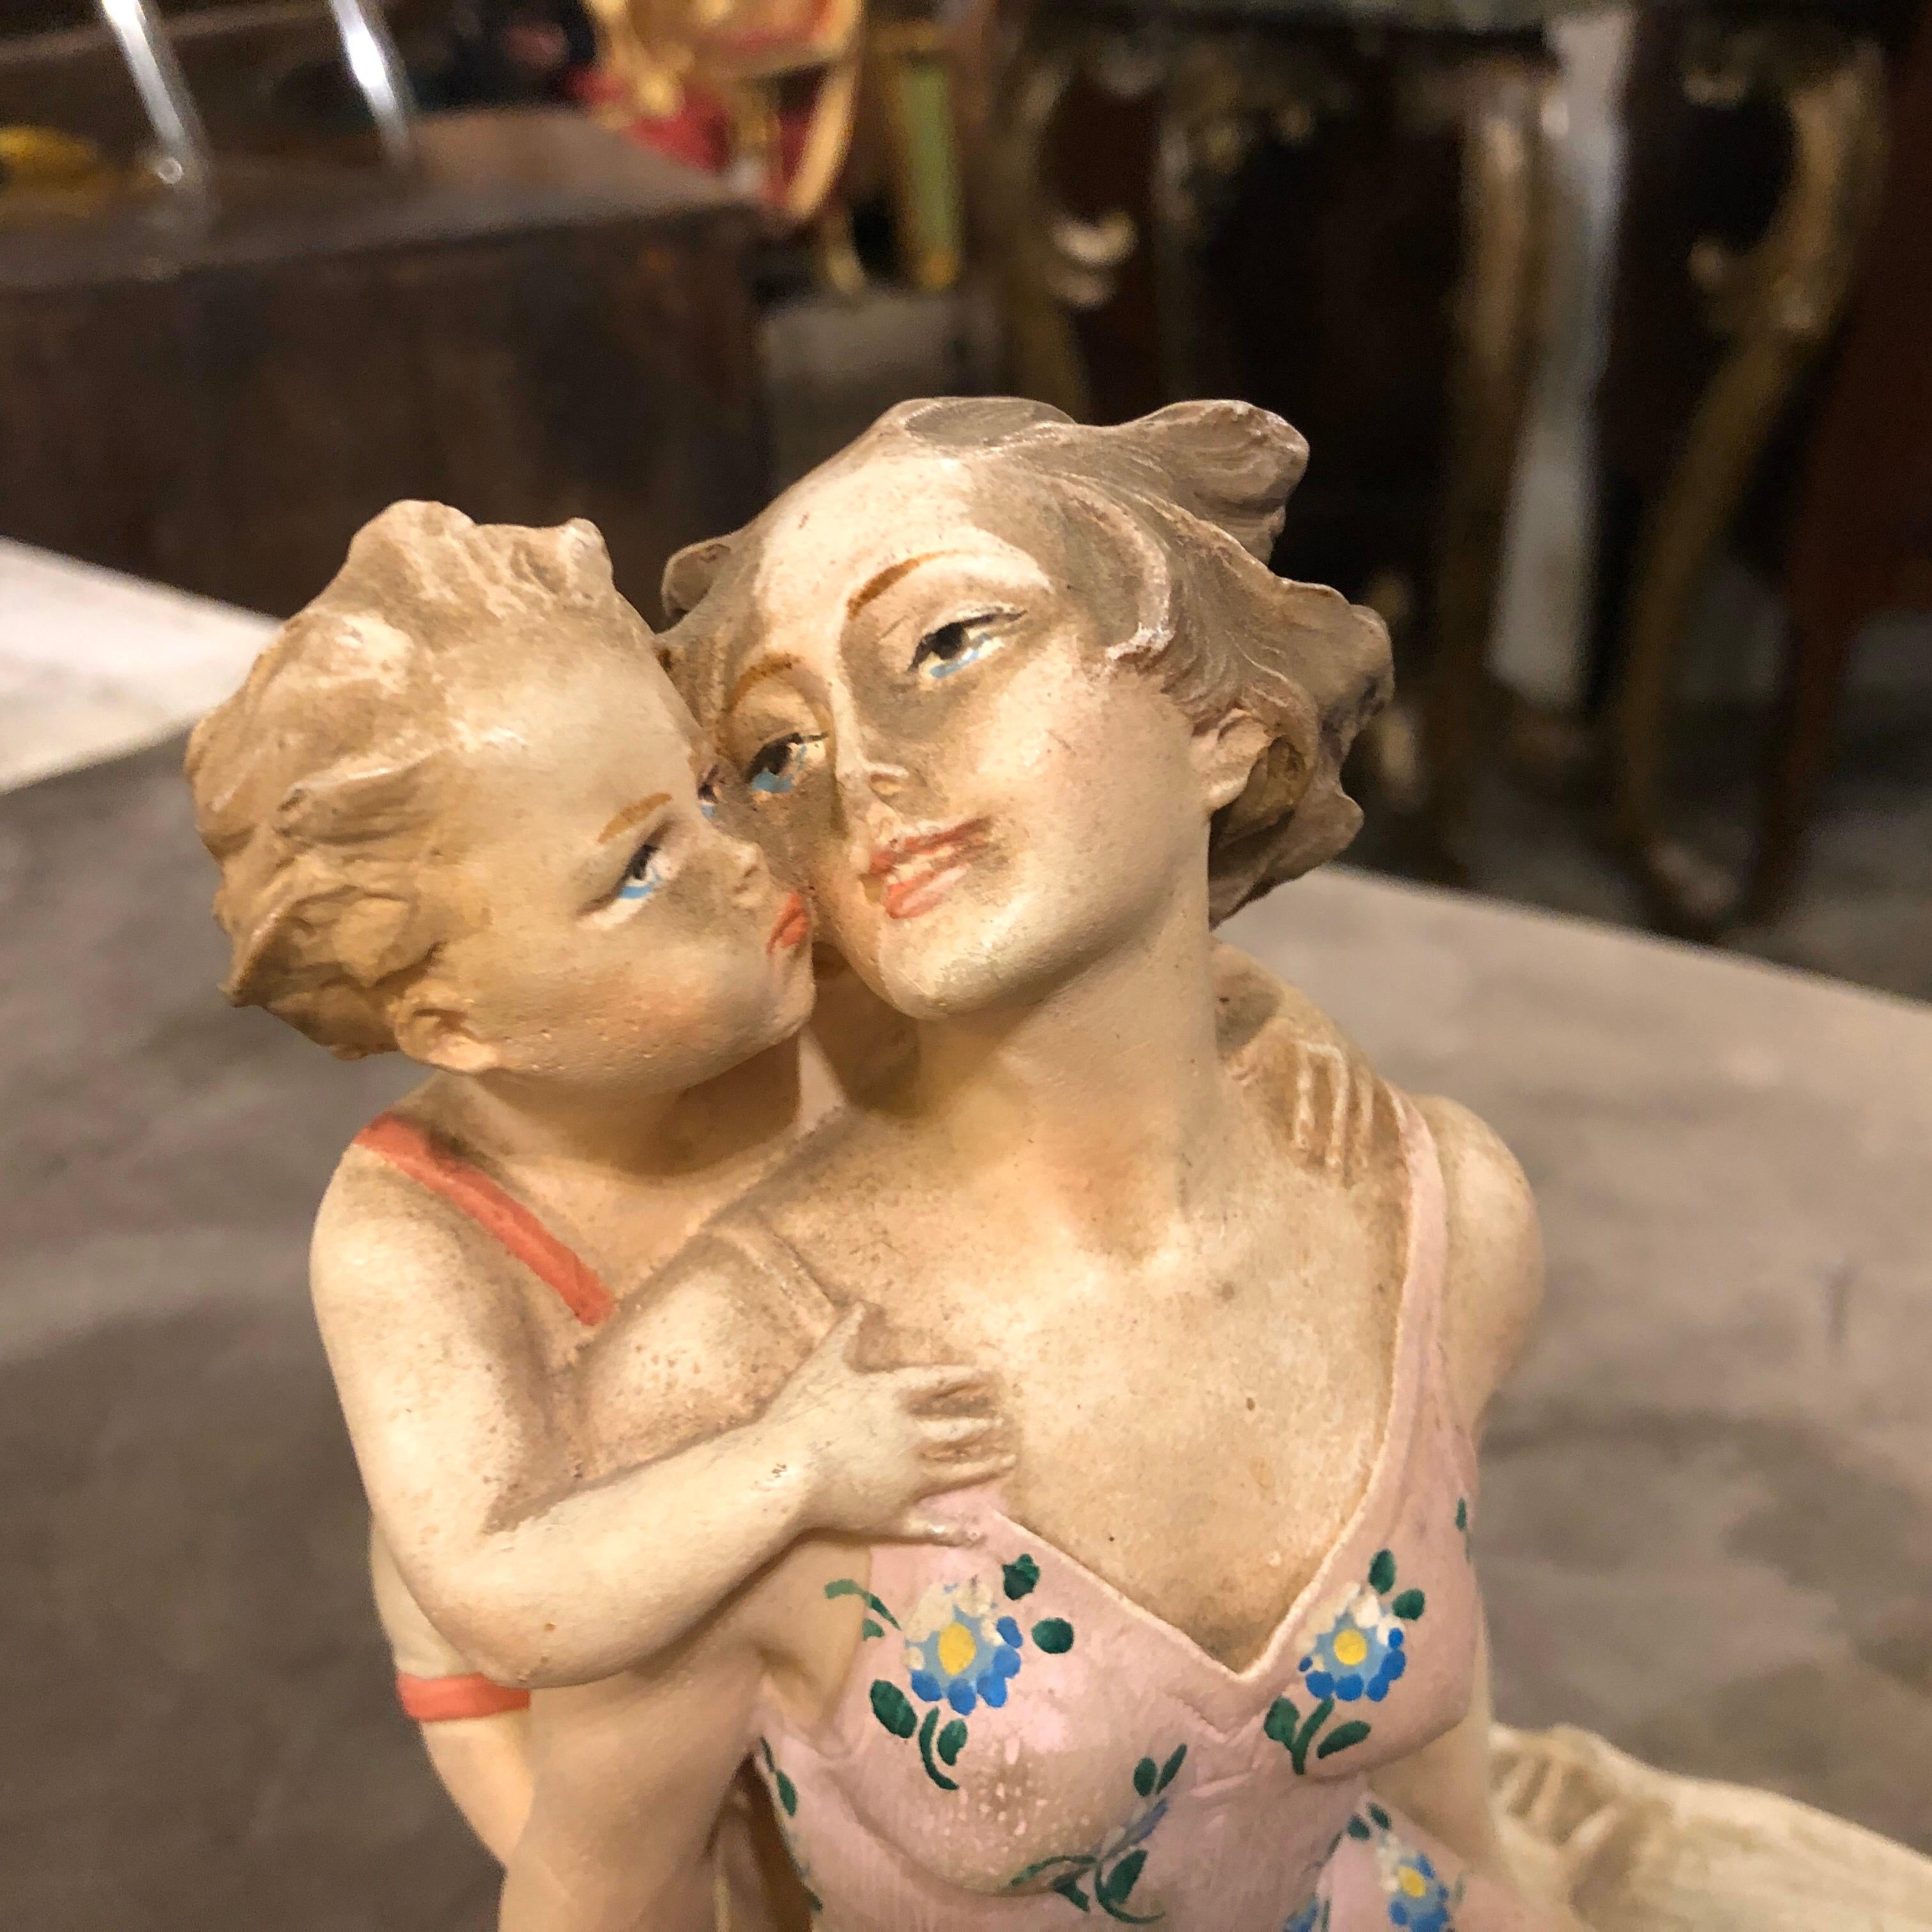 An Art Deco Italian statue depicting a woman and a baby at the beach, it's in perfect conditions.